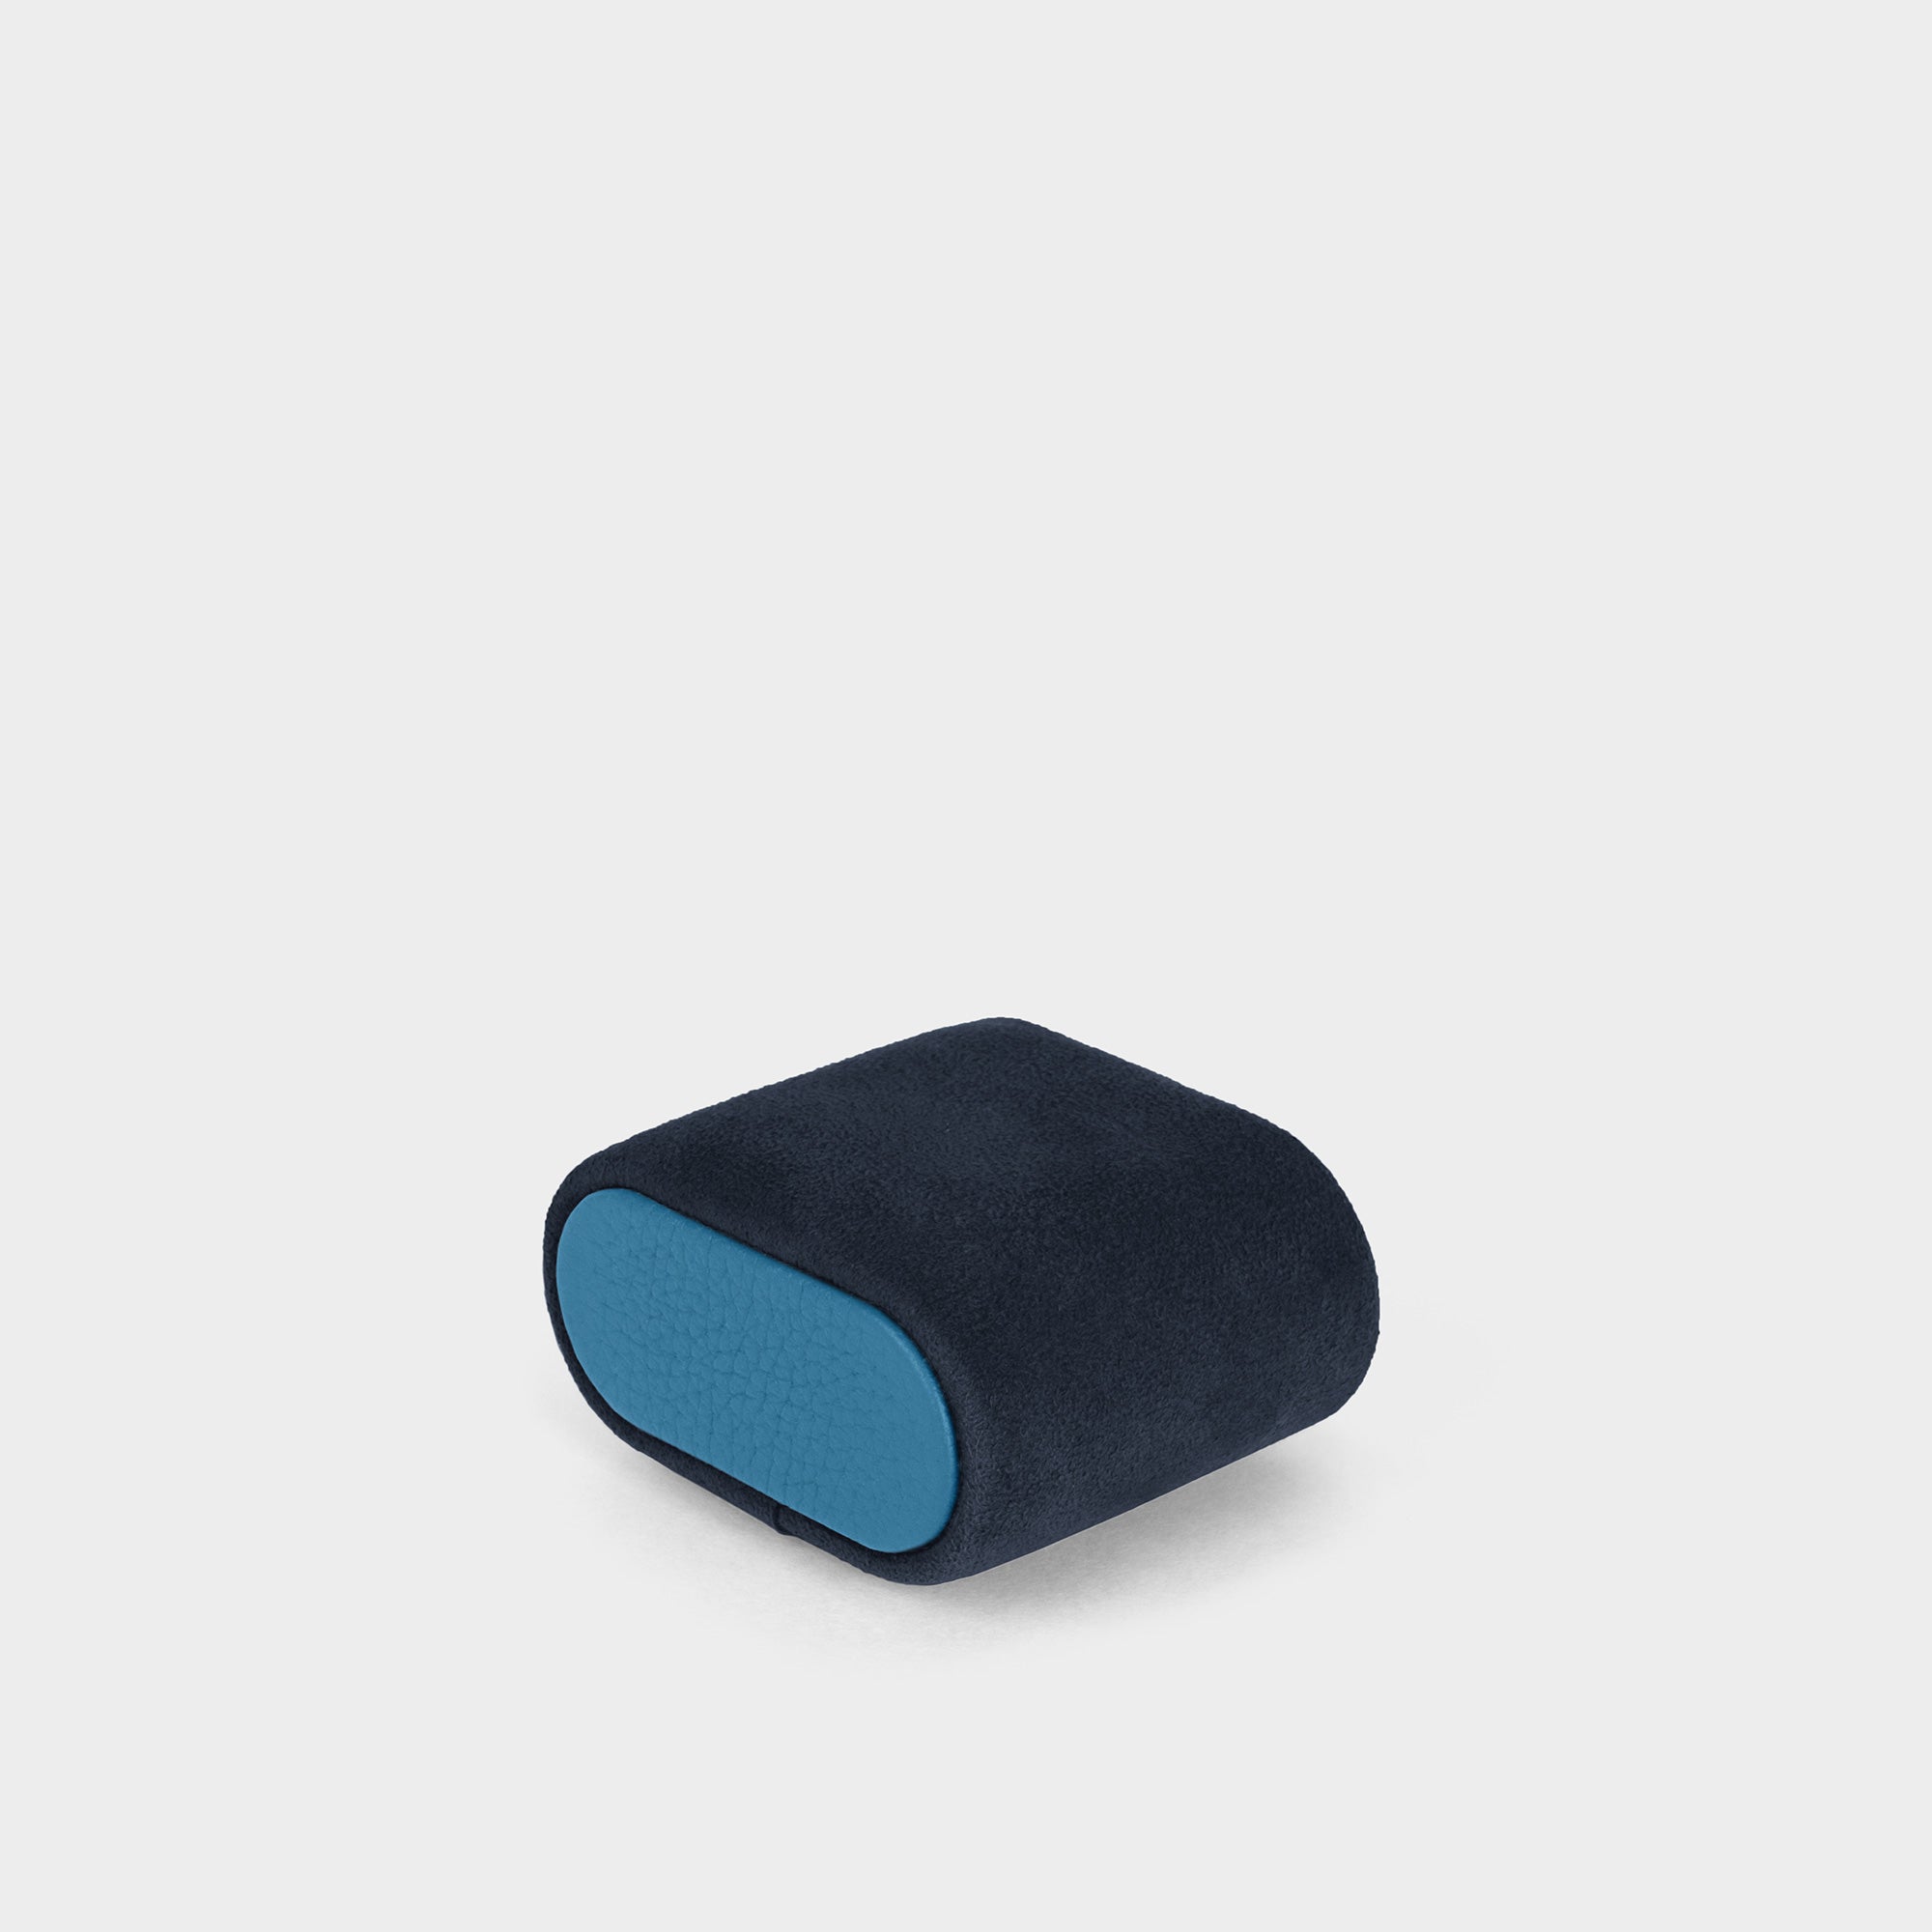 Removable Alcantara cushion with sky blue leather accents